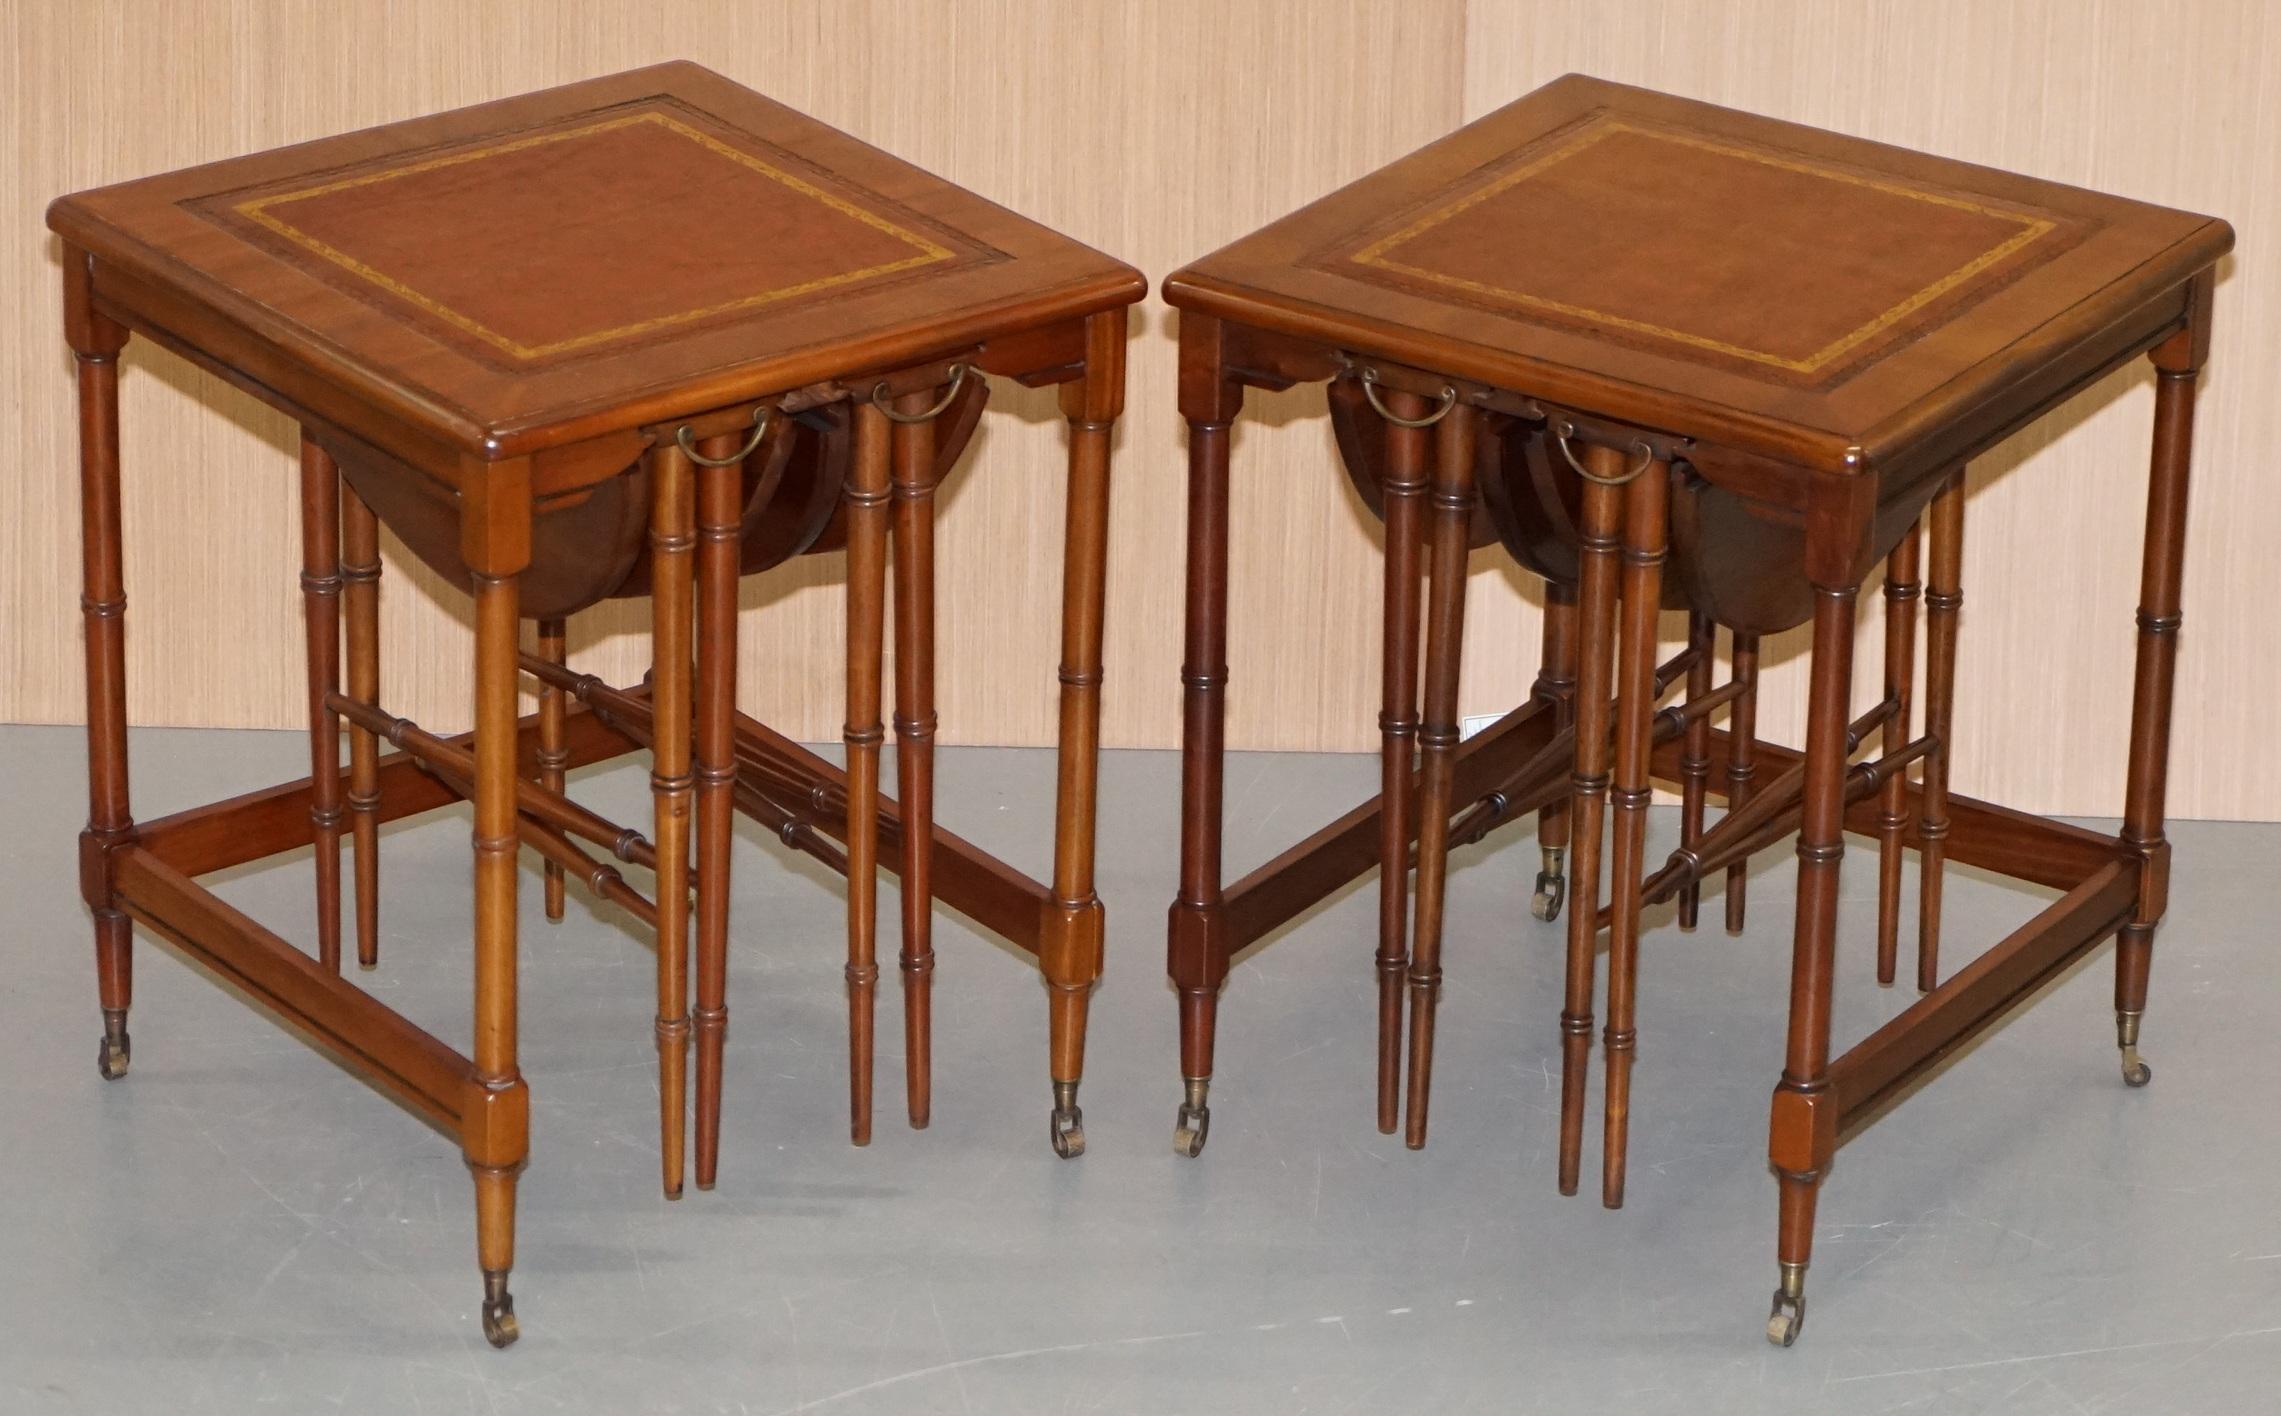 We are delighted to offer for sale this very rare pair of brown leather topped with gold leaf embossed edge Military Campaign tables with folded round tables inside

A very good looking and rare set of tables, each piece has a premium cattle hide